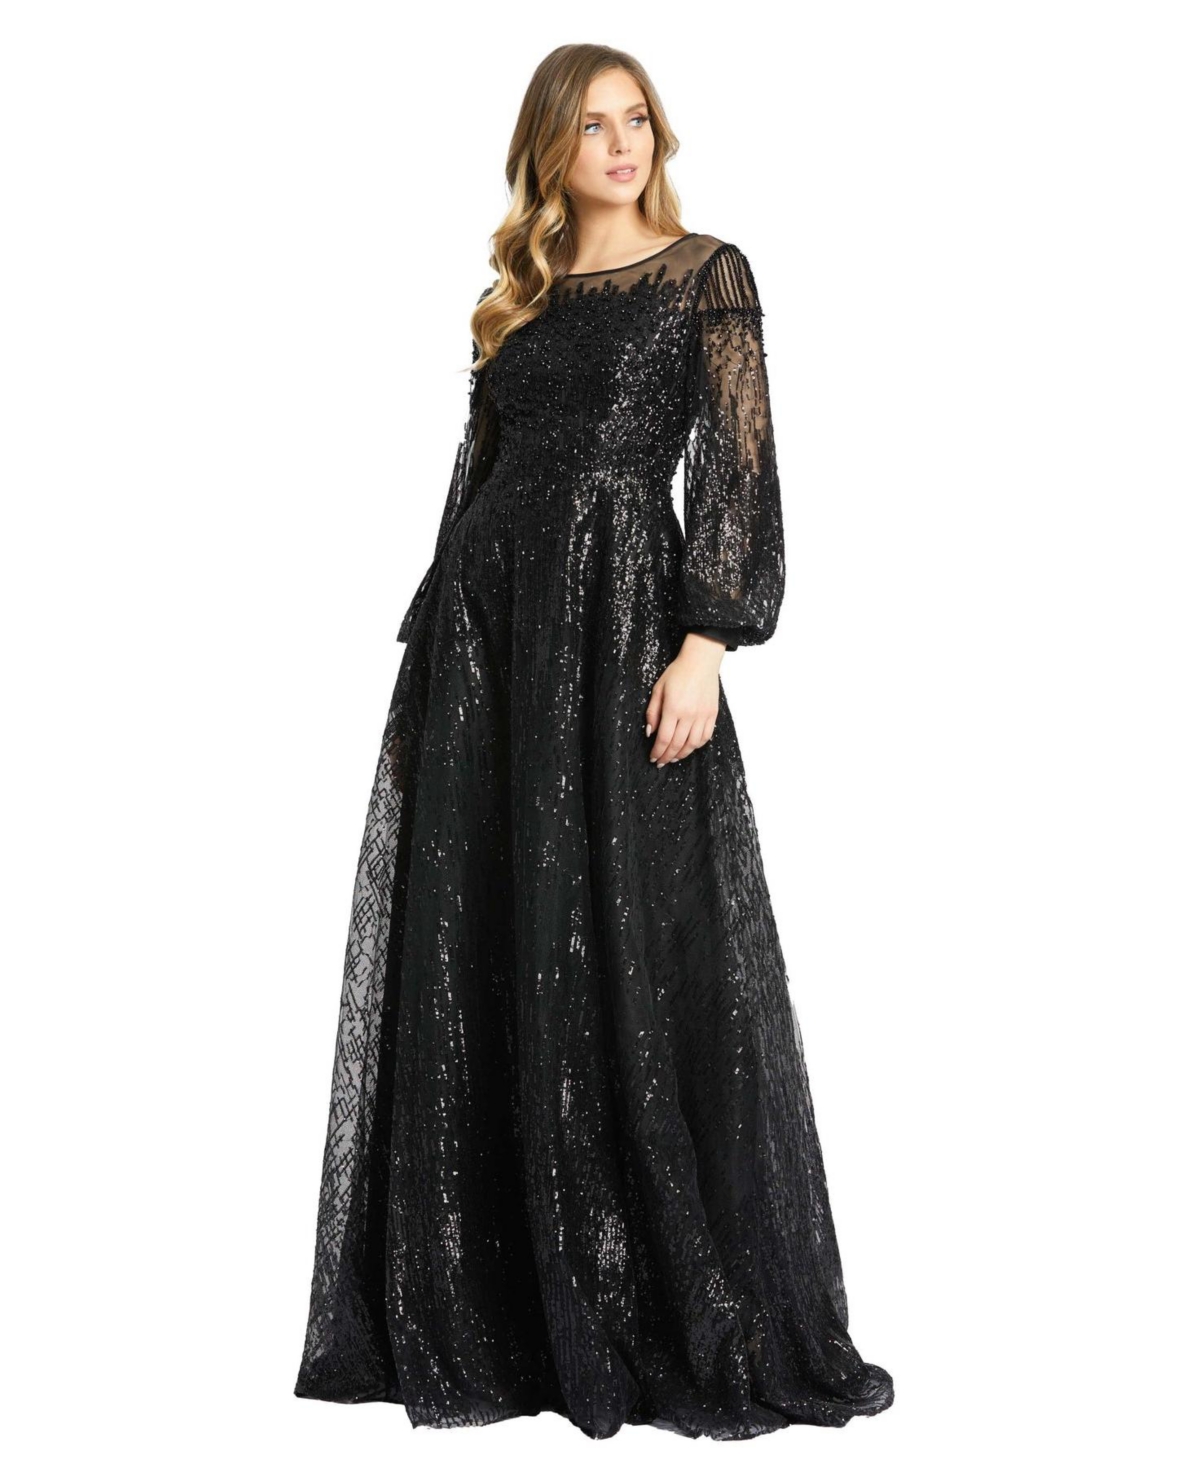 Women's Jewel Encrusted Illusion Long Sleeve A Line Gown - Black